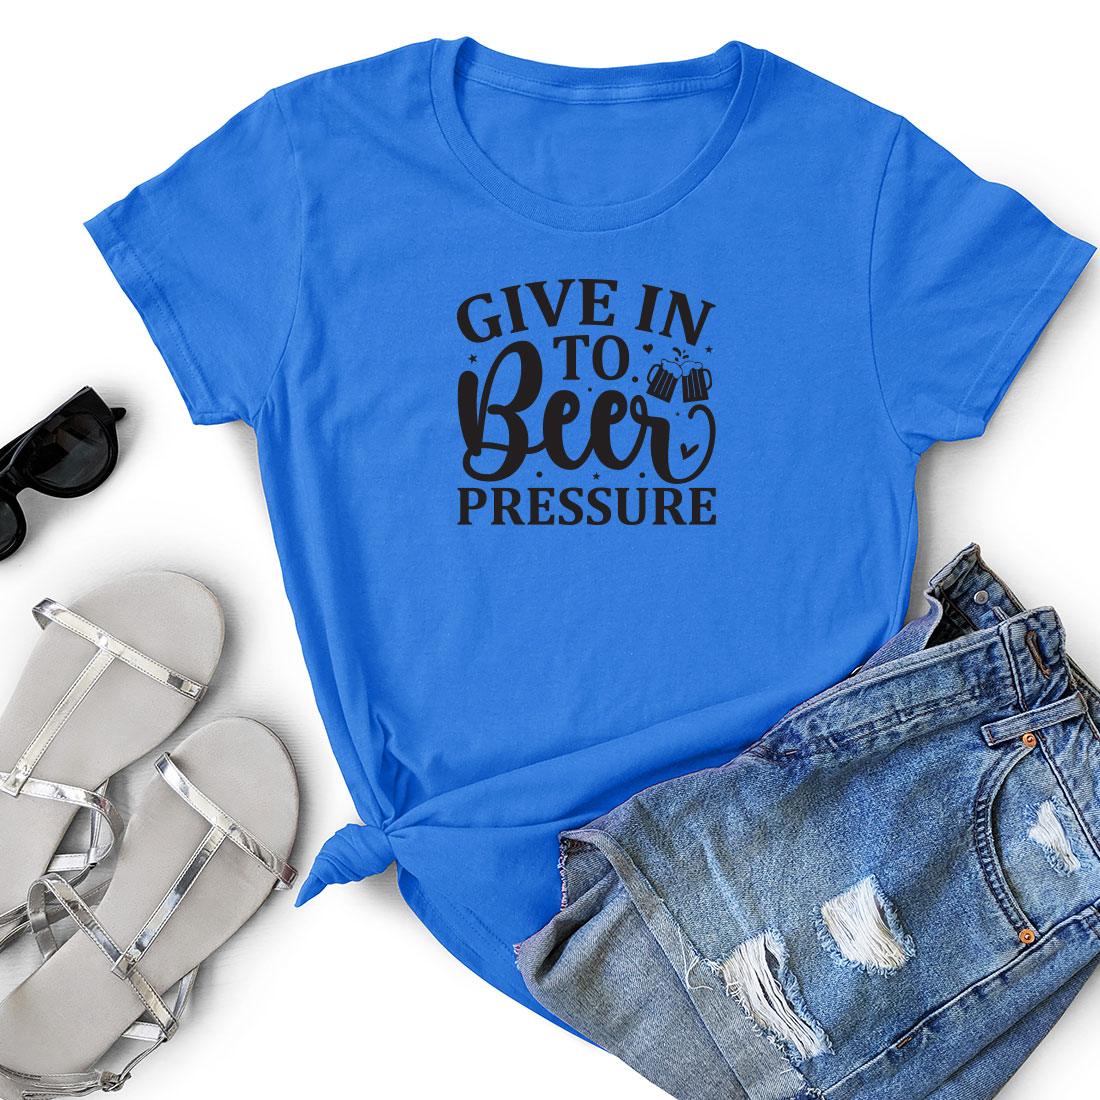 T - shirt that says give in to beer pressure next to a pair of.